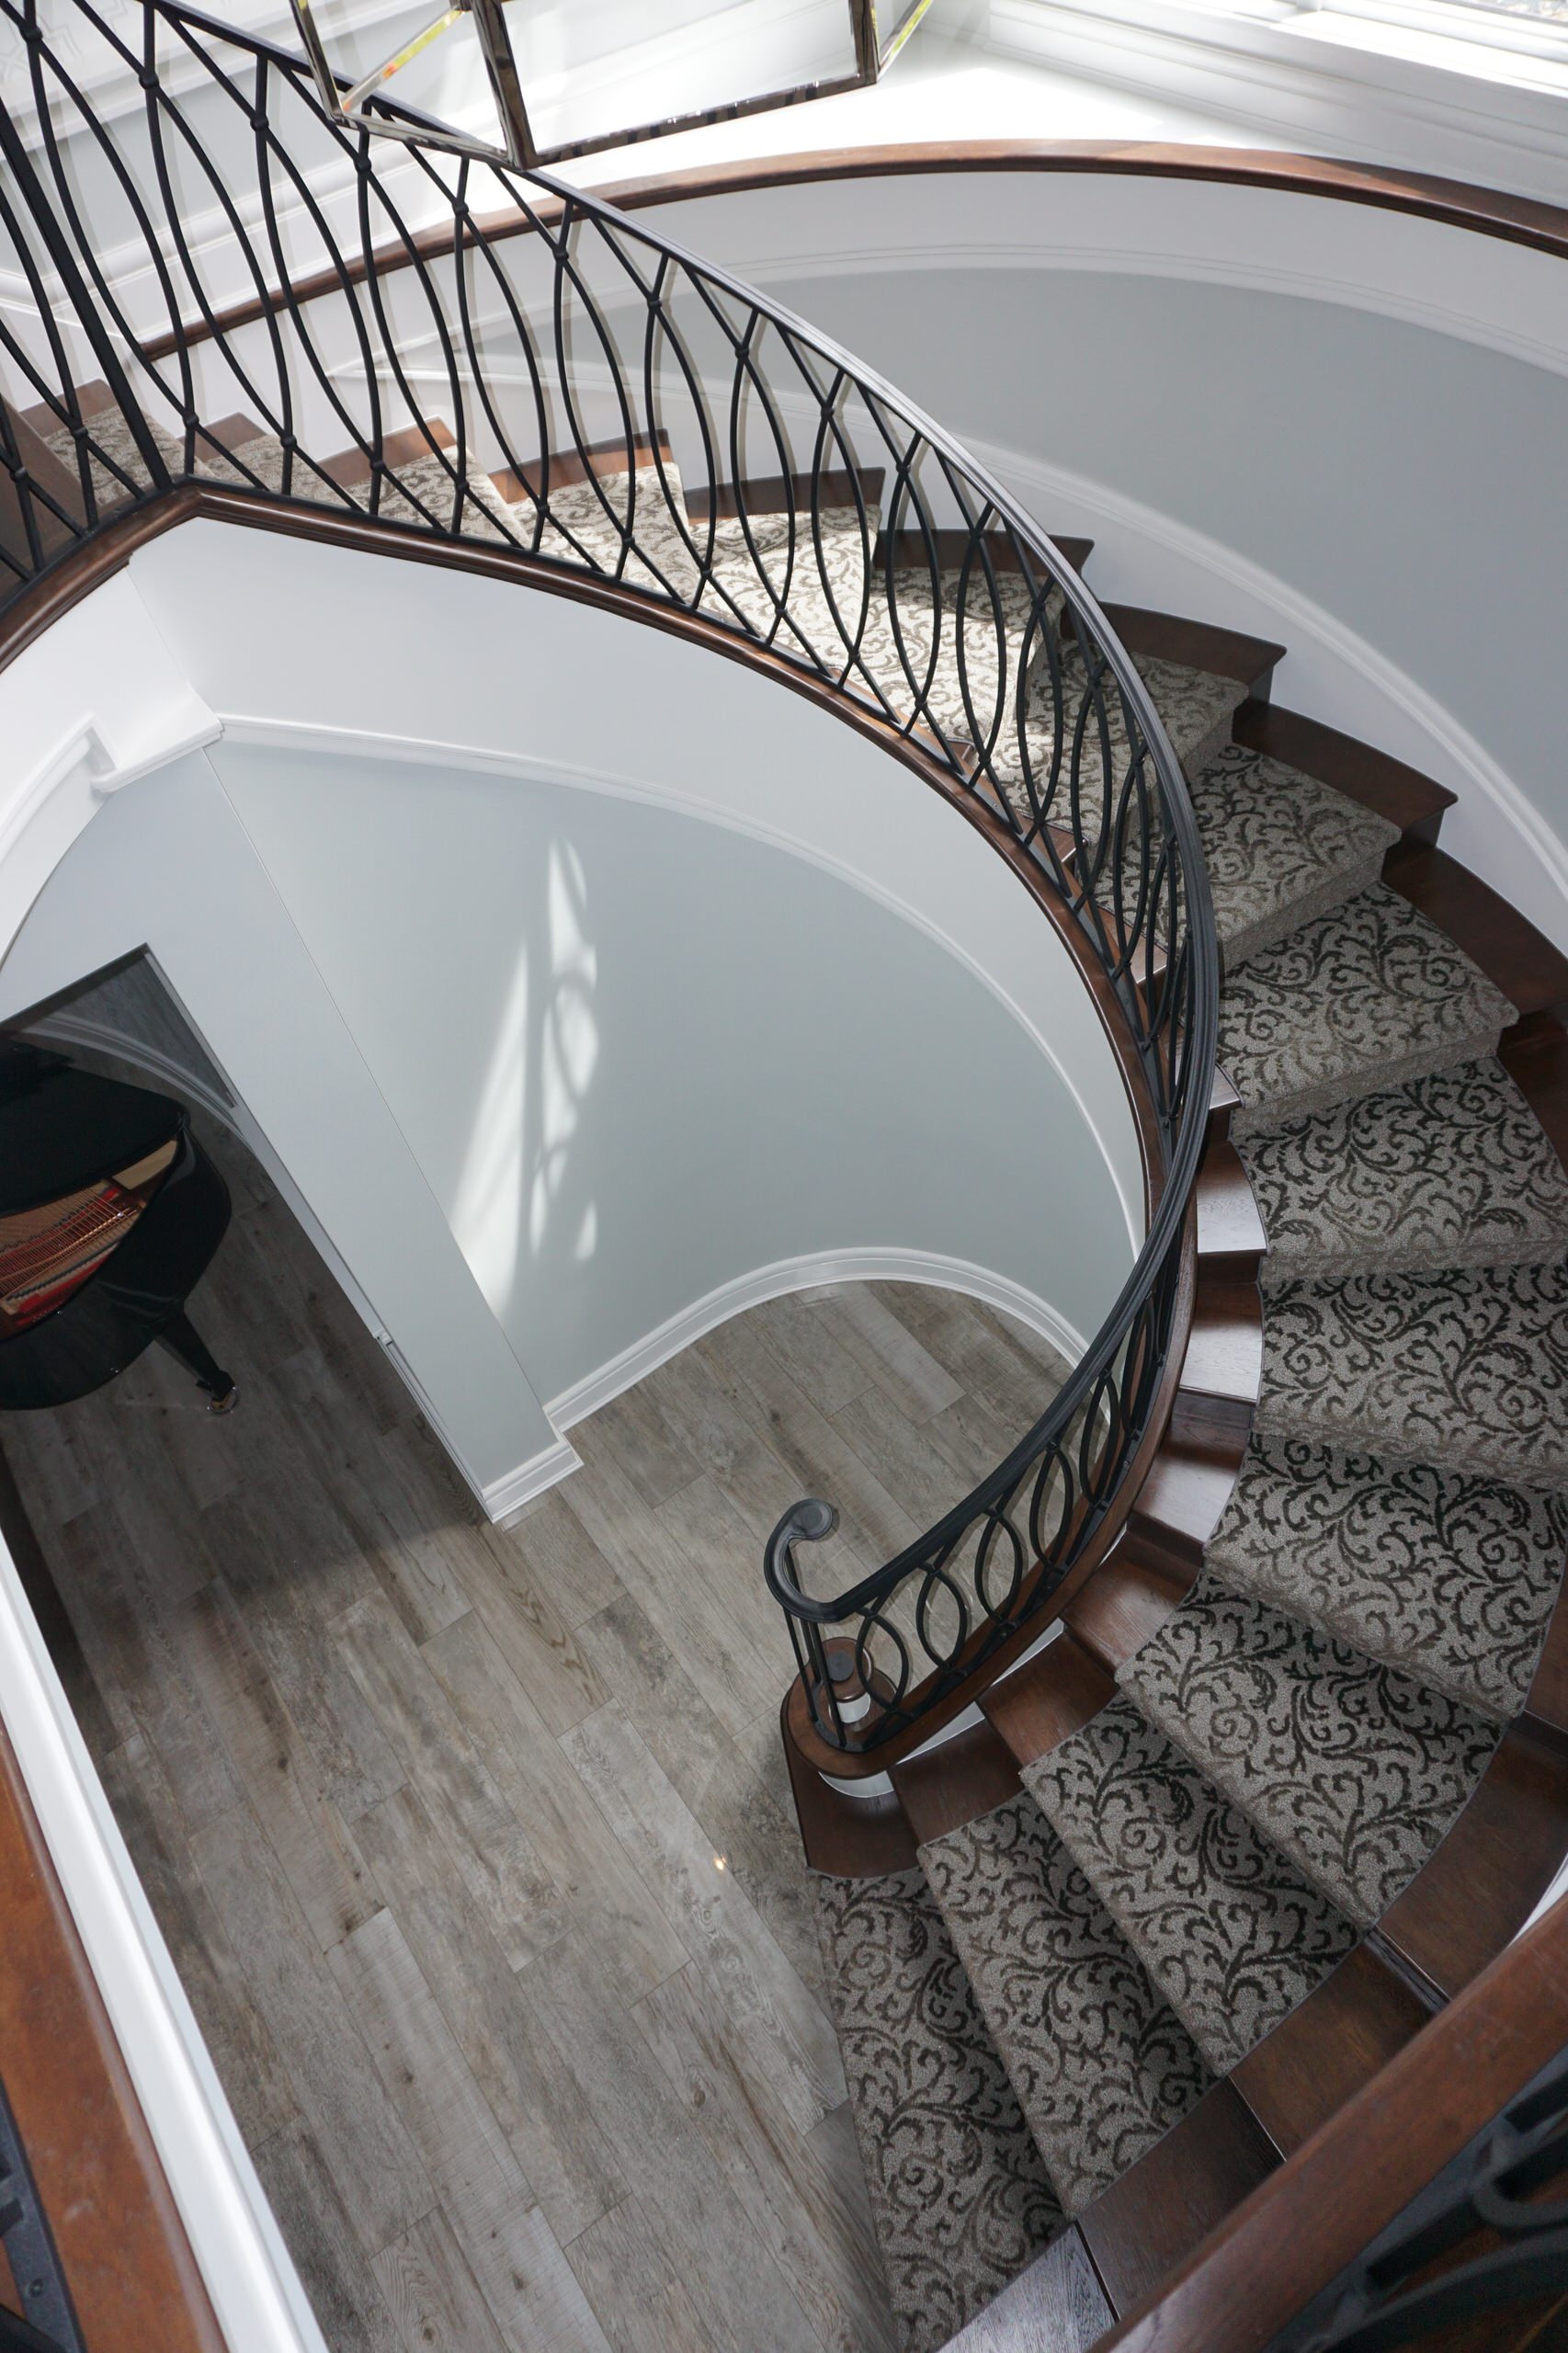 Piedmont StairWorks - Curved and Straight Stair Manufacturer